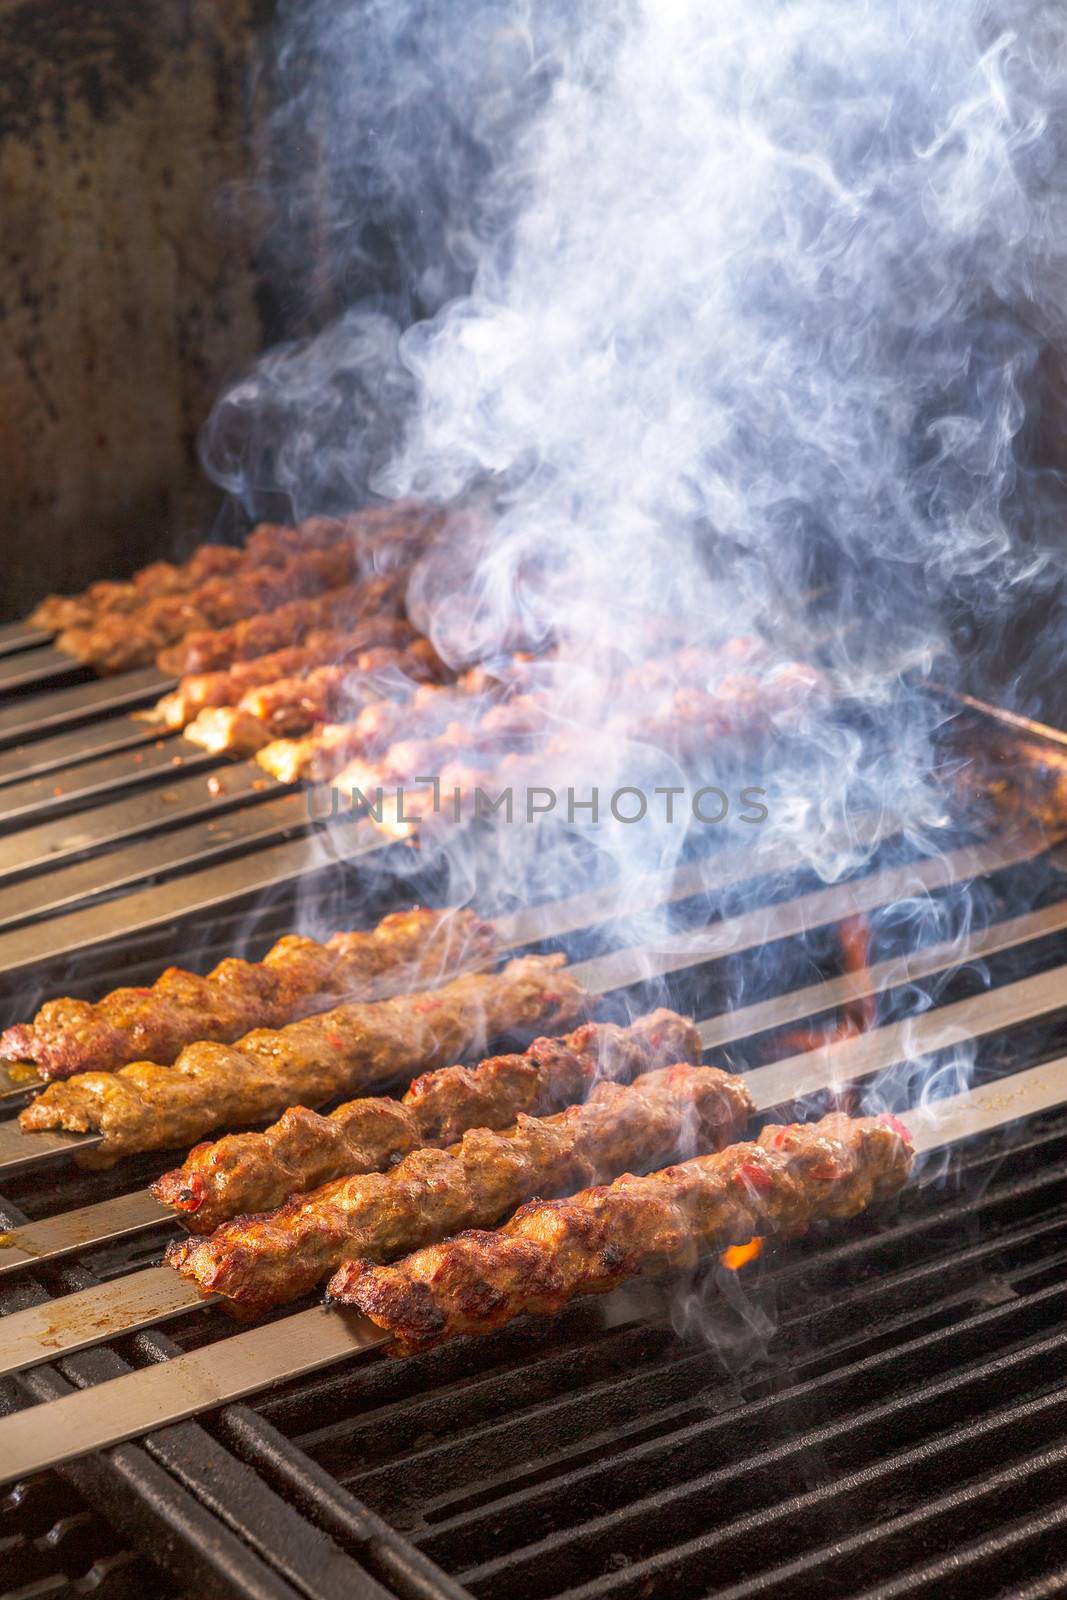 Cooking Adana kebabs on the restaurant style grill, smoke  coming out from them that they might be ready